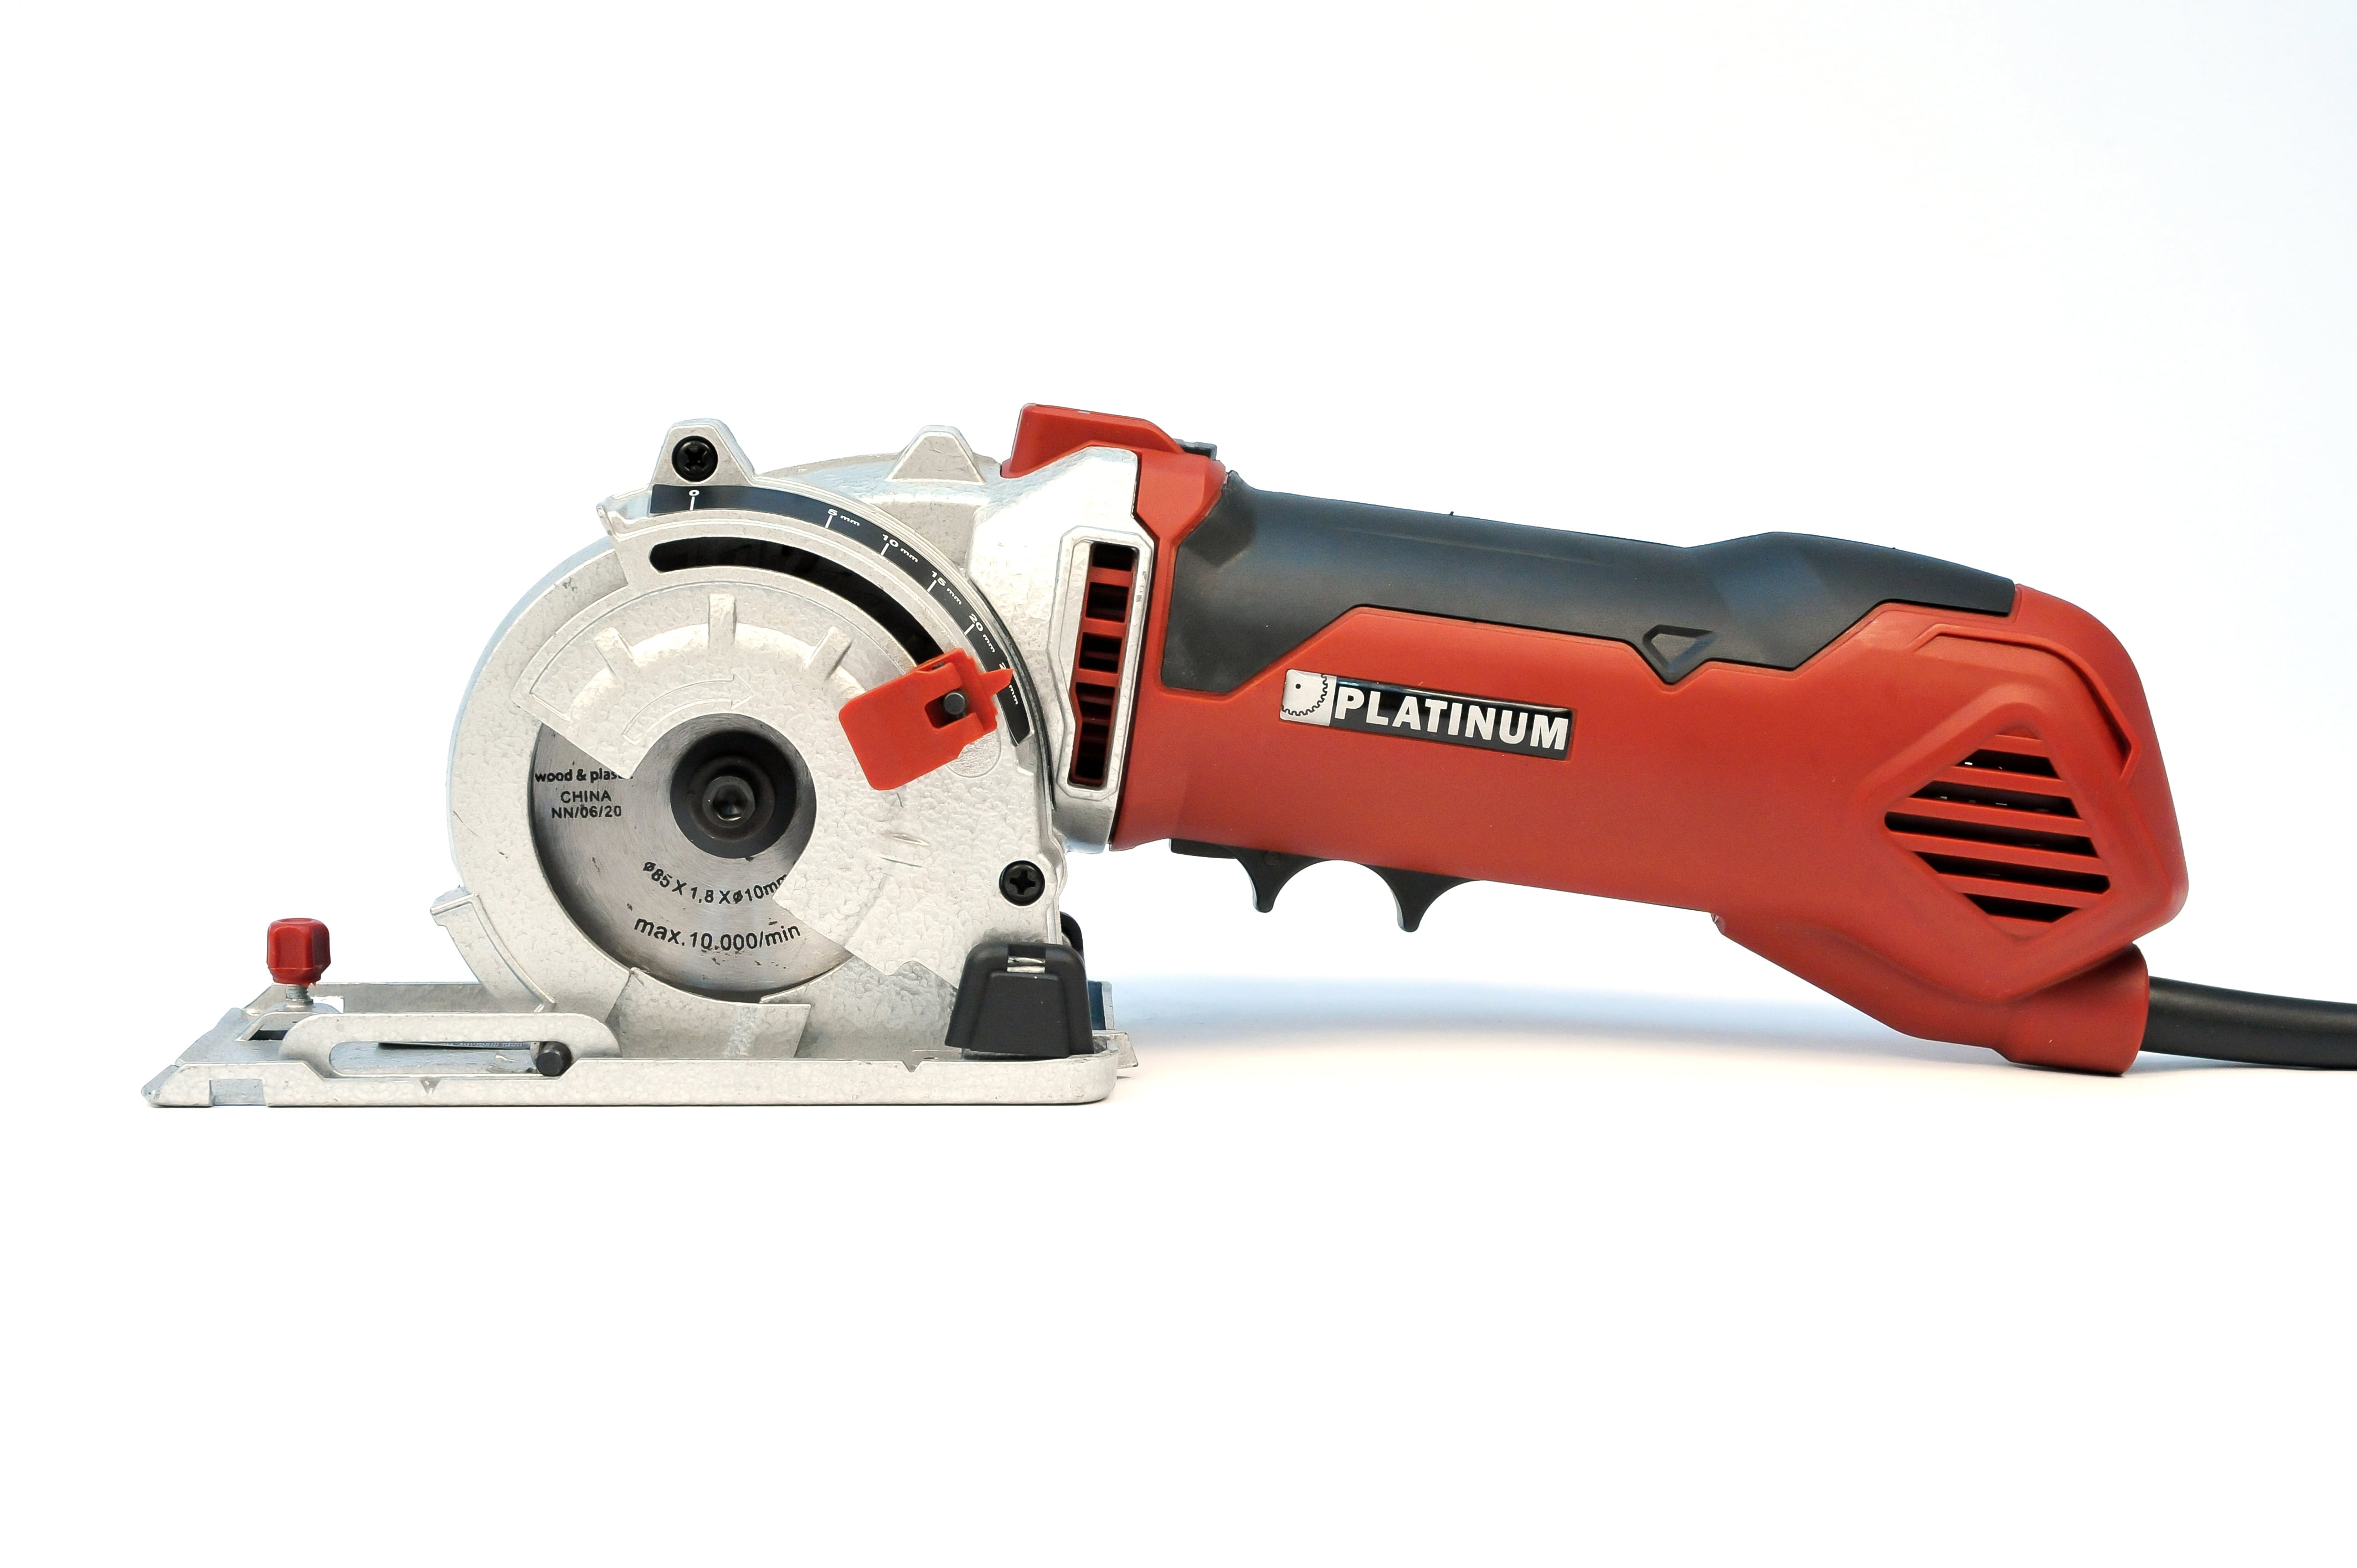 ROTORAZER SAW Platinum Compact Circular Saw Set - Extra Powerful - Deeper  Cuts! DIY Projects - Cut Drywall, Tile, Grout, Metal, Pipes, PVC, Plastic,  and Copper.…